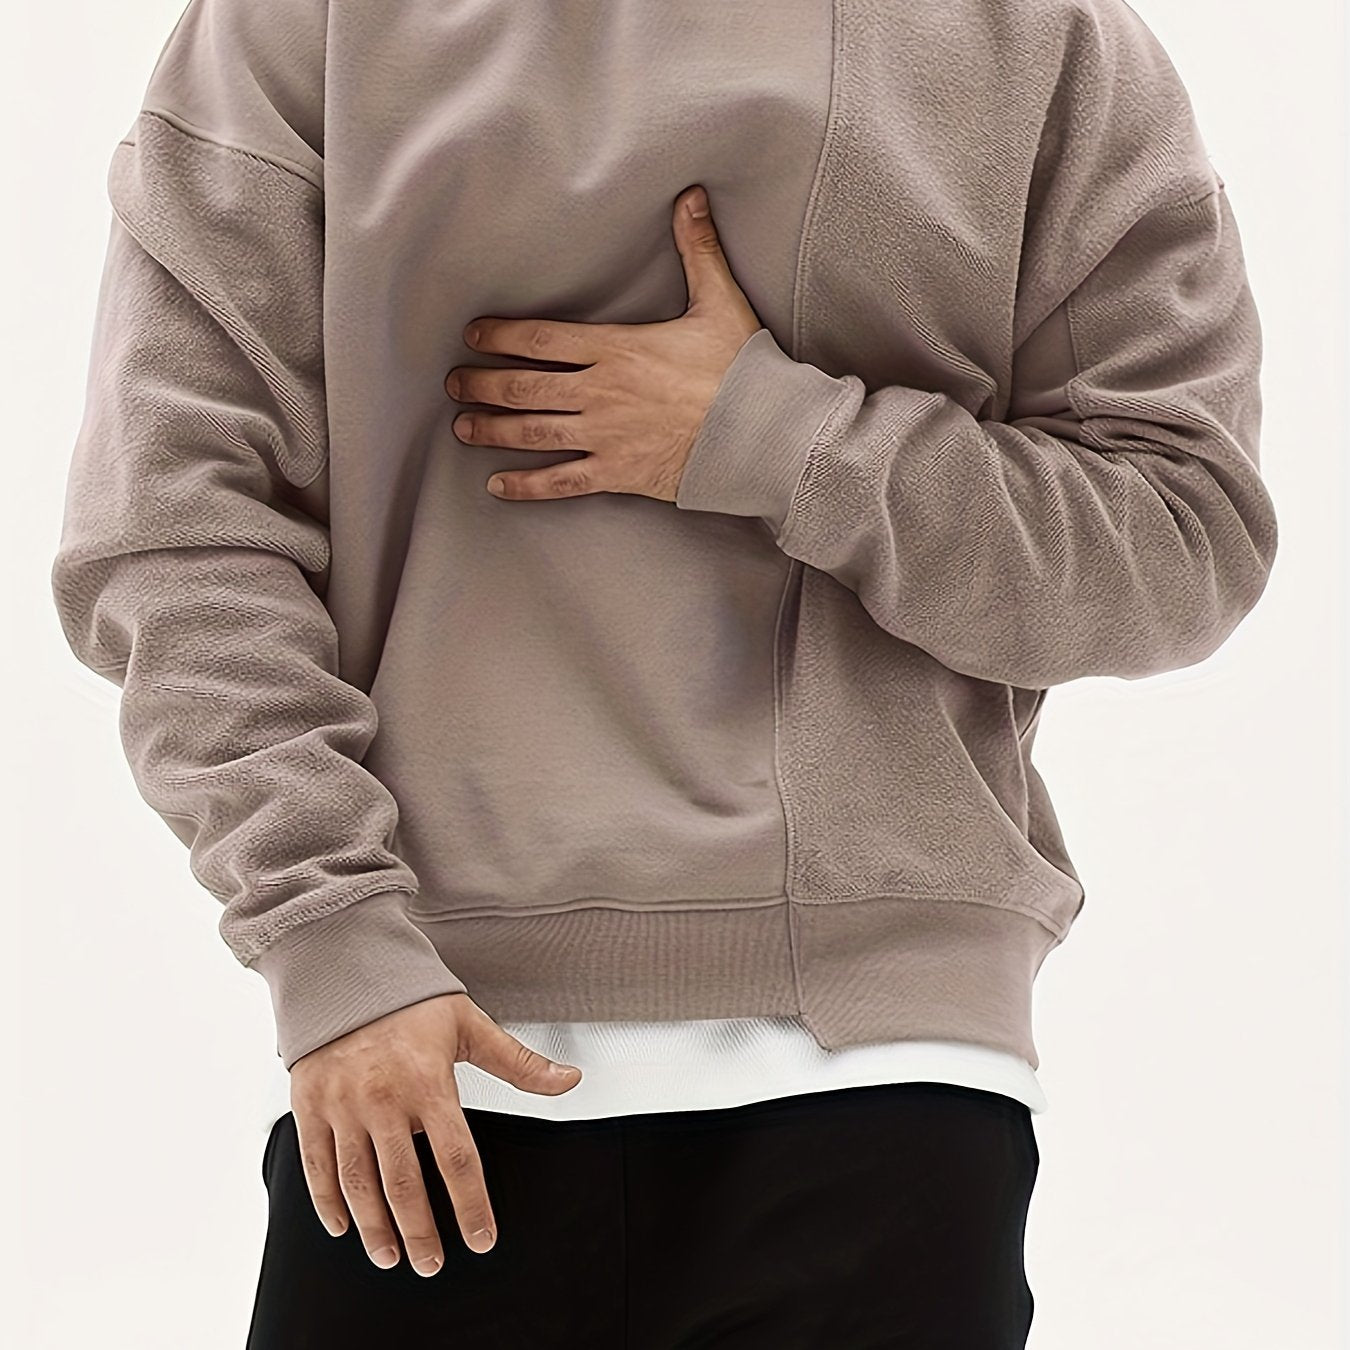 Men's Trendy Solid Sweatshirt, Casual Cotton Slightly Stretch Breathable Long Sleeve Loose Top For Outdoor